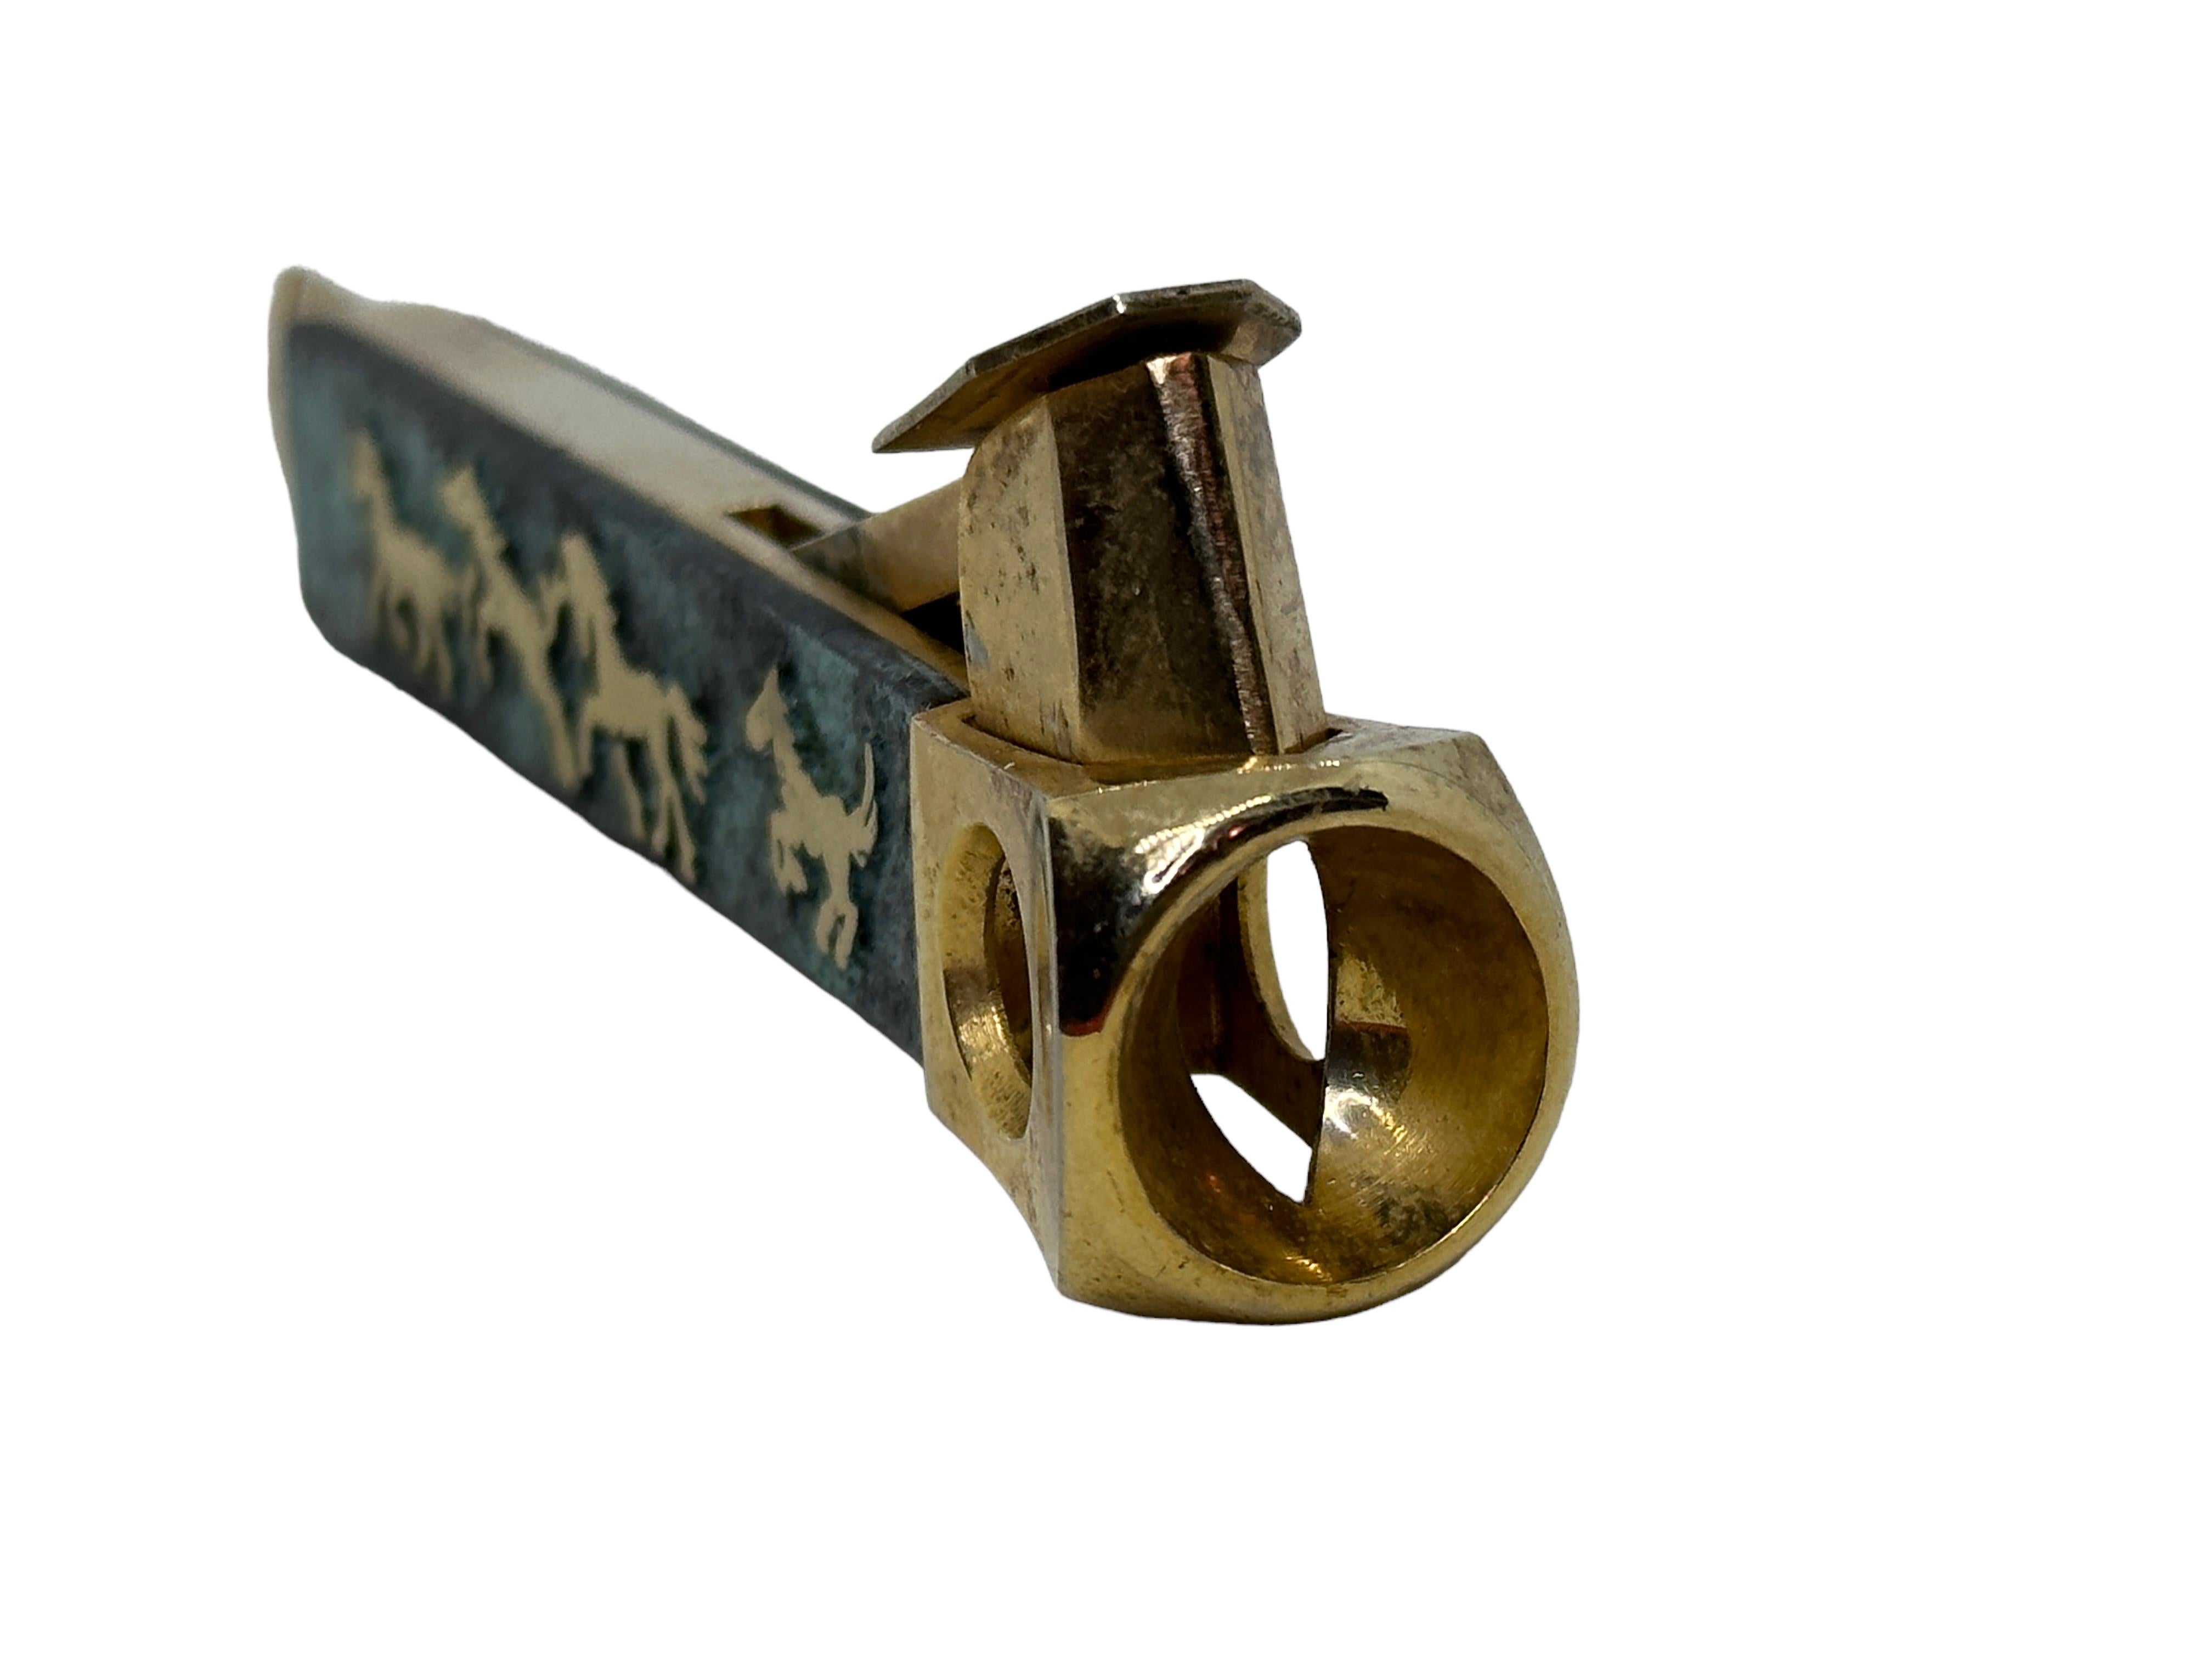 Mid-20th Century vintage Cigar Cutter with Horse Motif, 1950s German